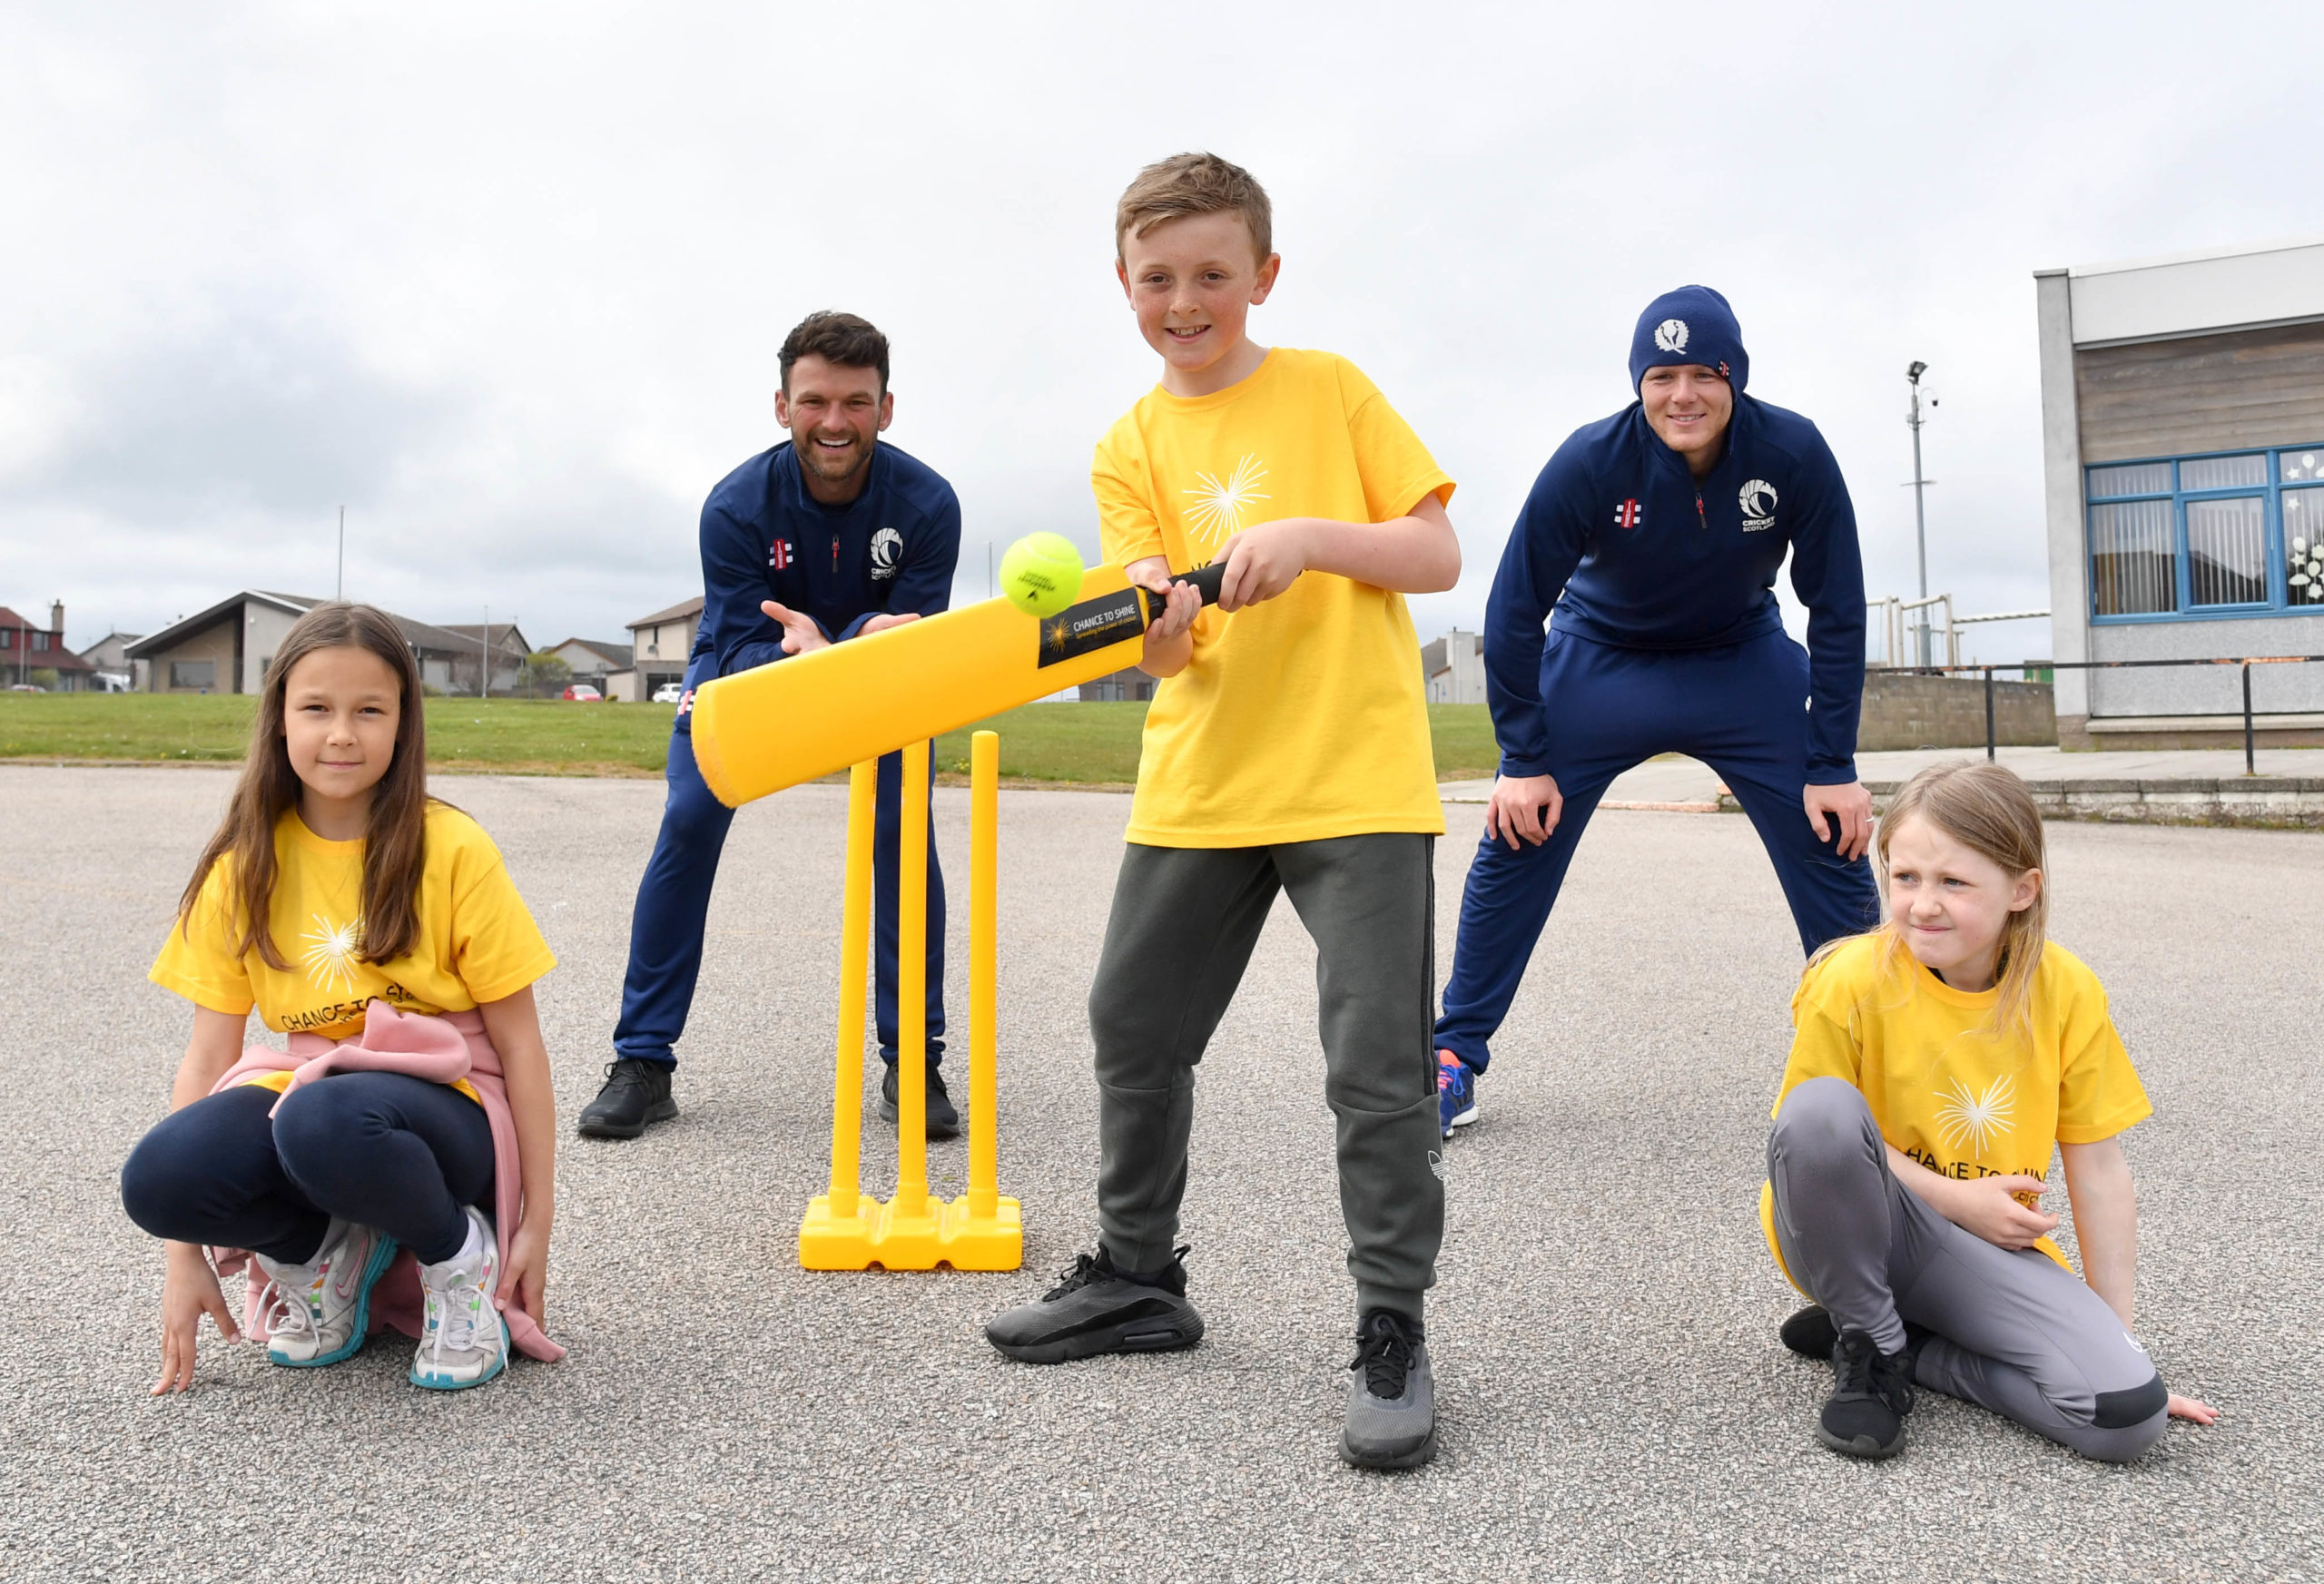 Cricket Scotland teams up with Chance to Shine to bring cricket to Aberdeenshire schools